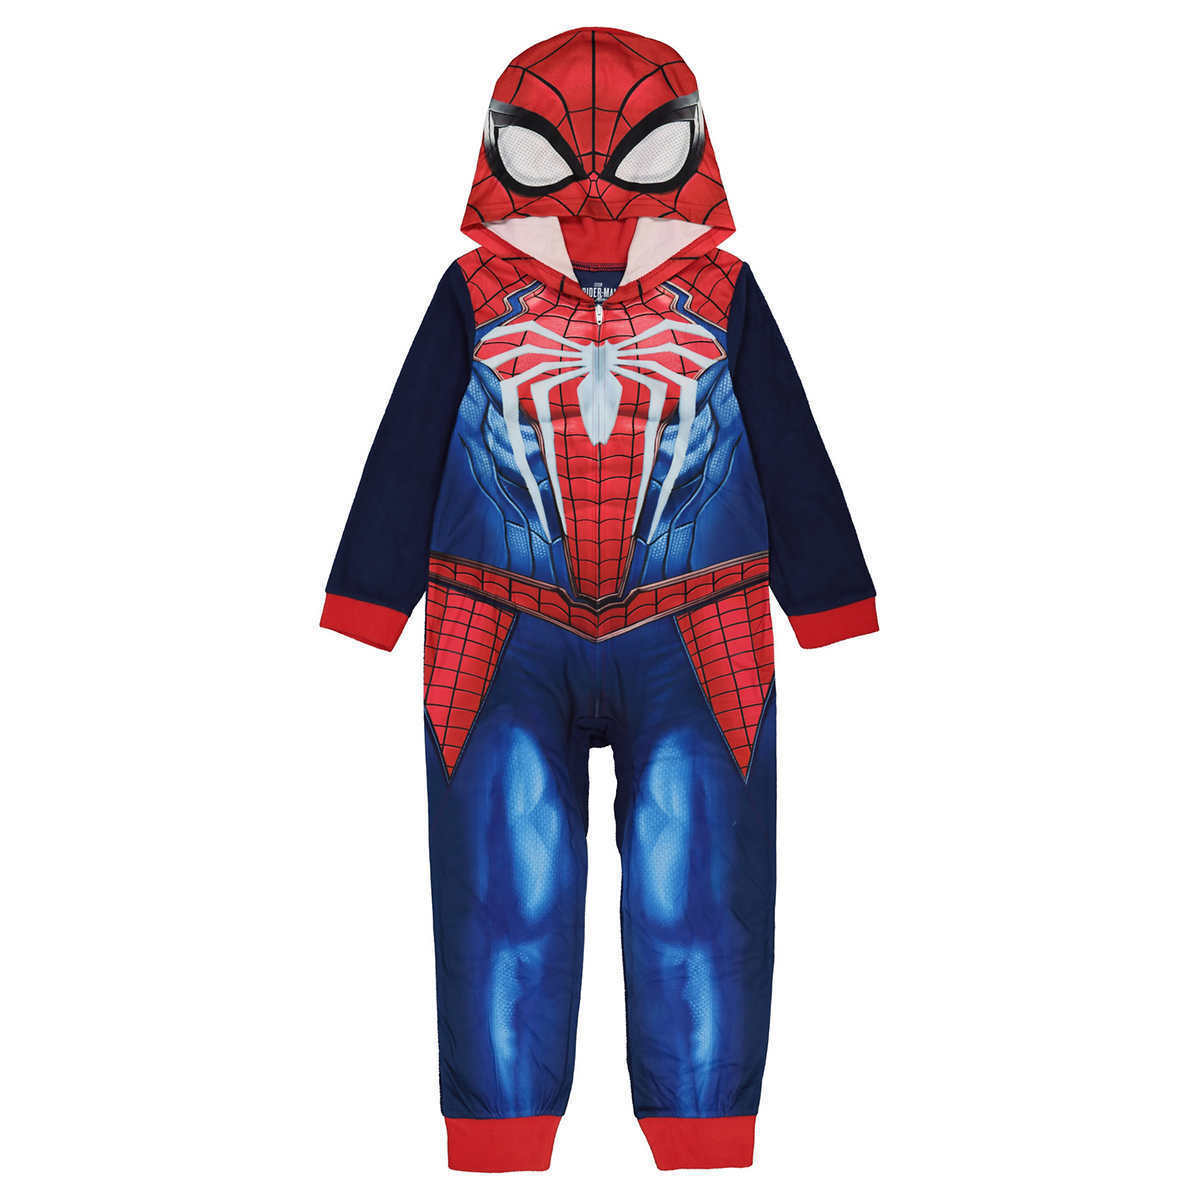 Marvel Spider-man Kids Hooded Blanket Pajama Sleeper Sizes 6-10 New With Tag